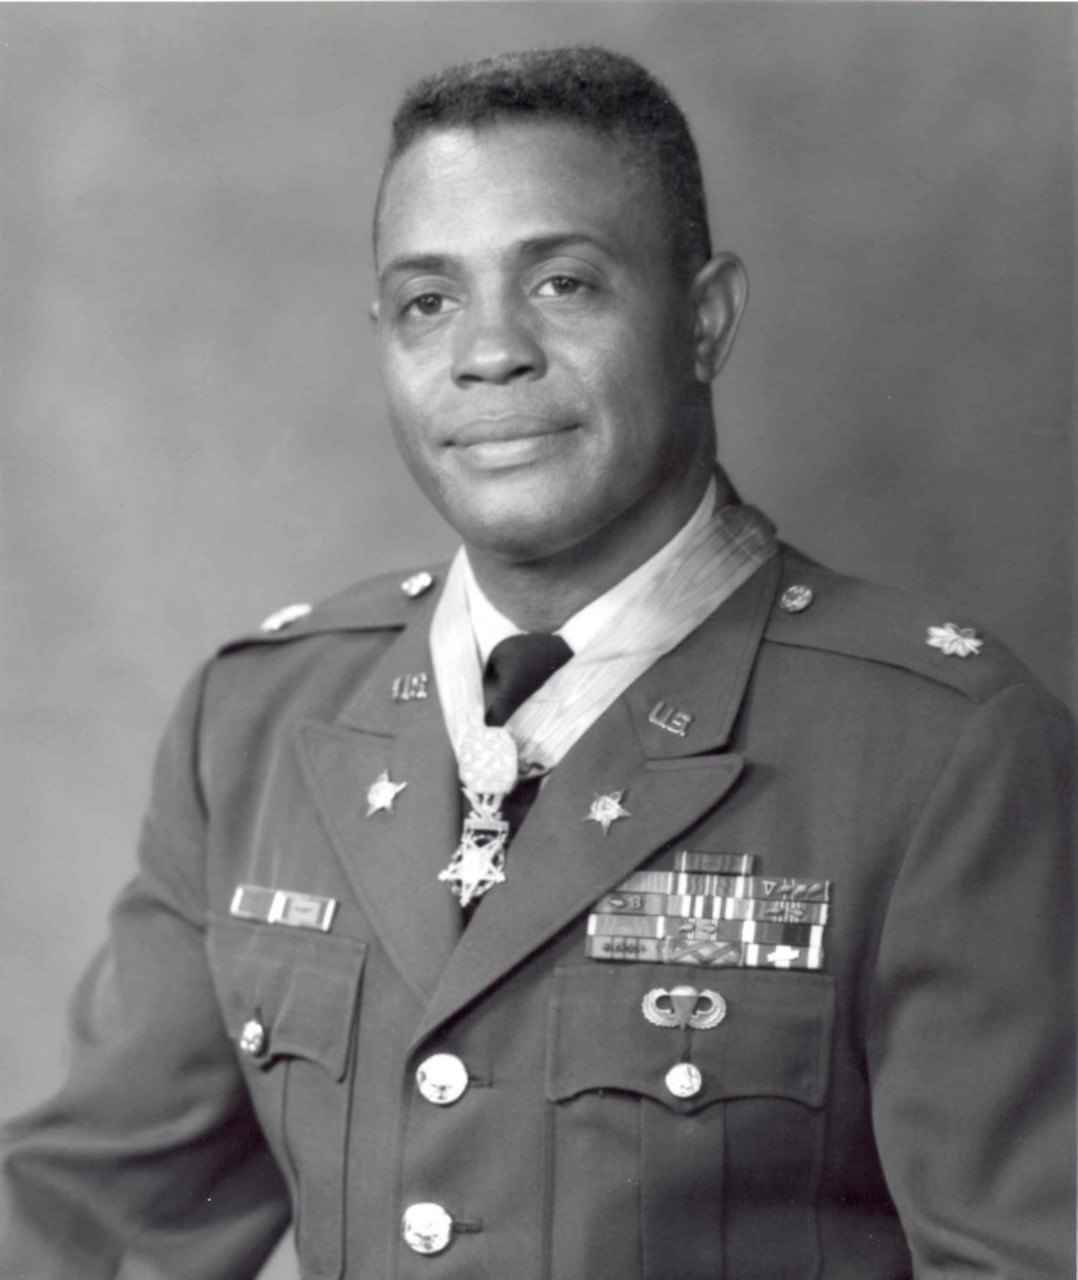 A man in dress uniform poses for an official photo.